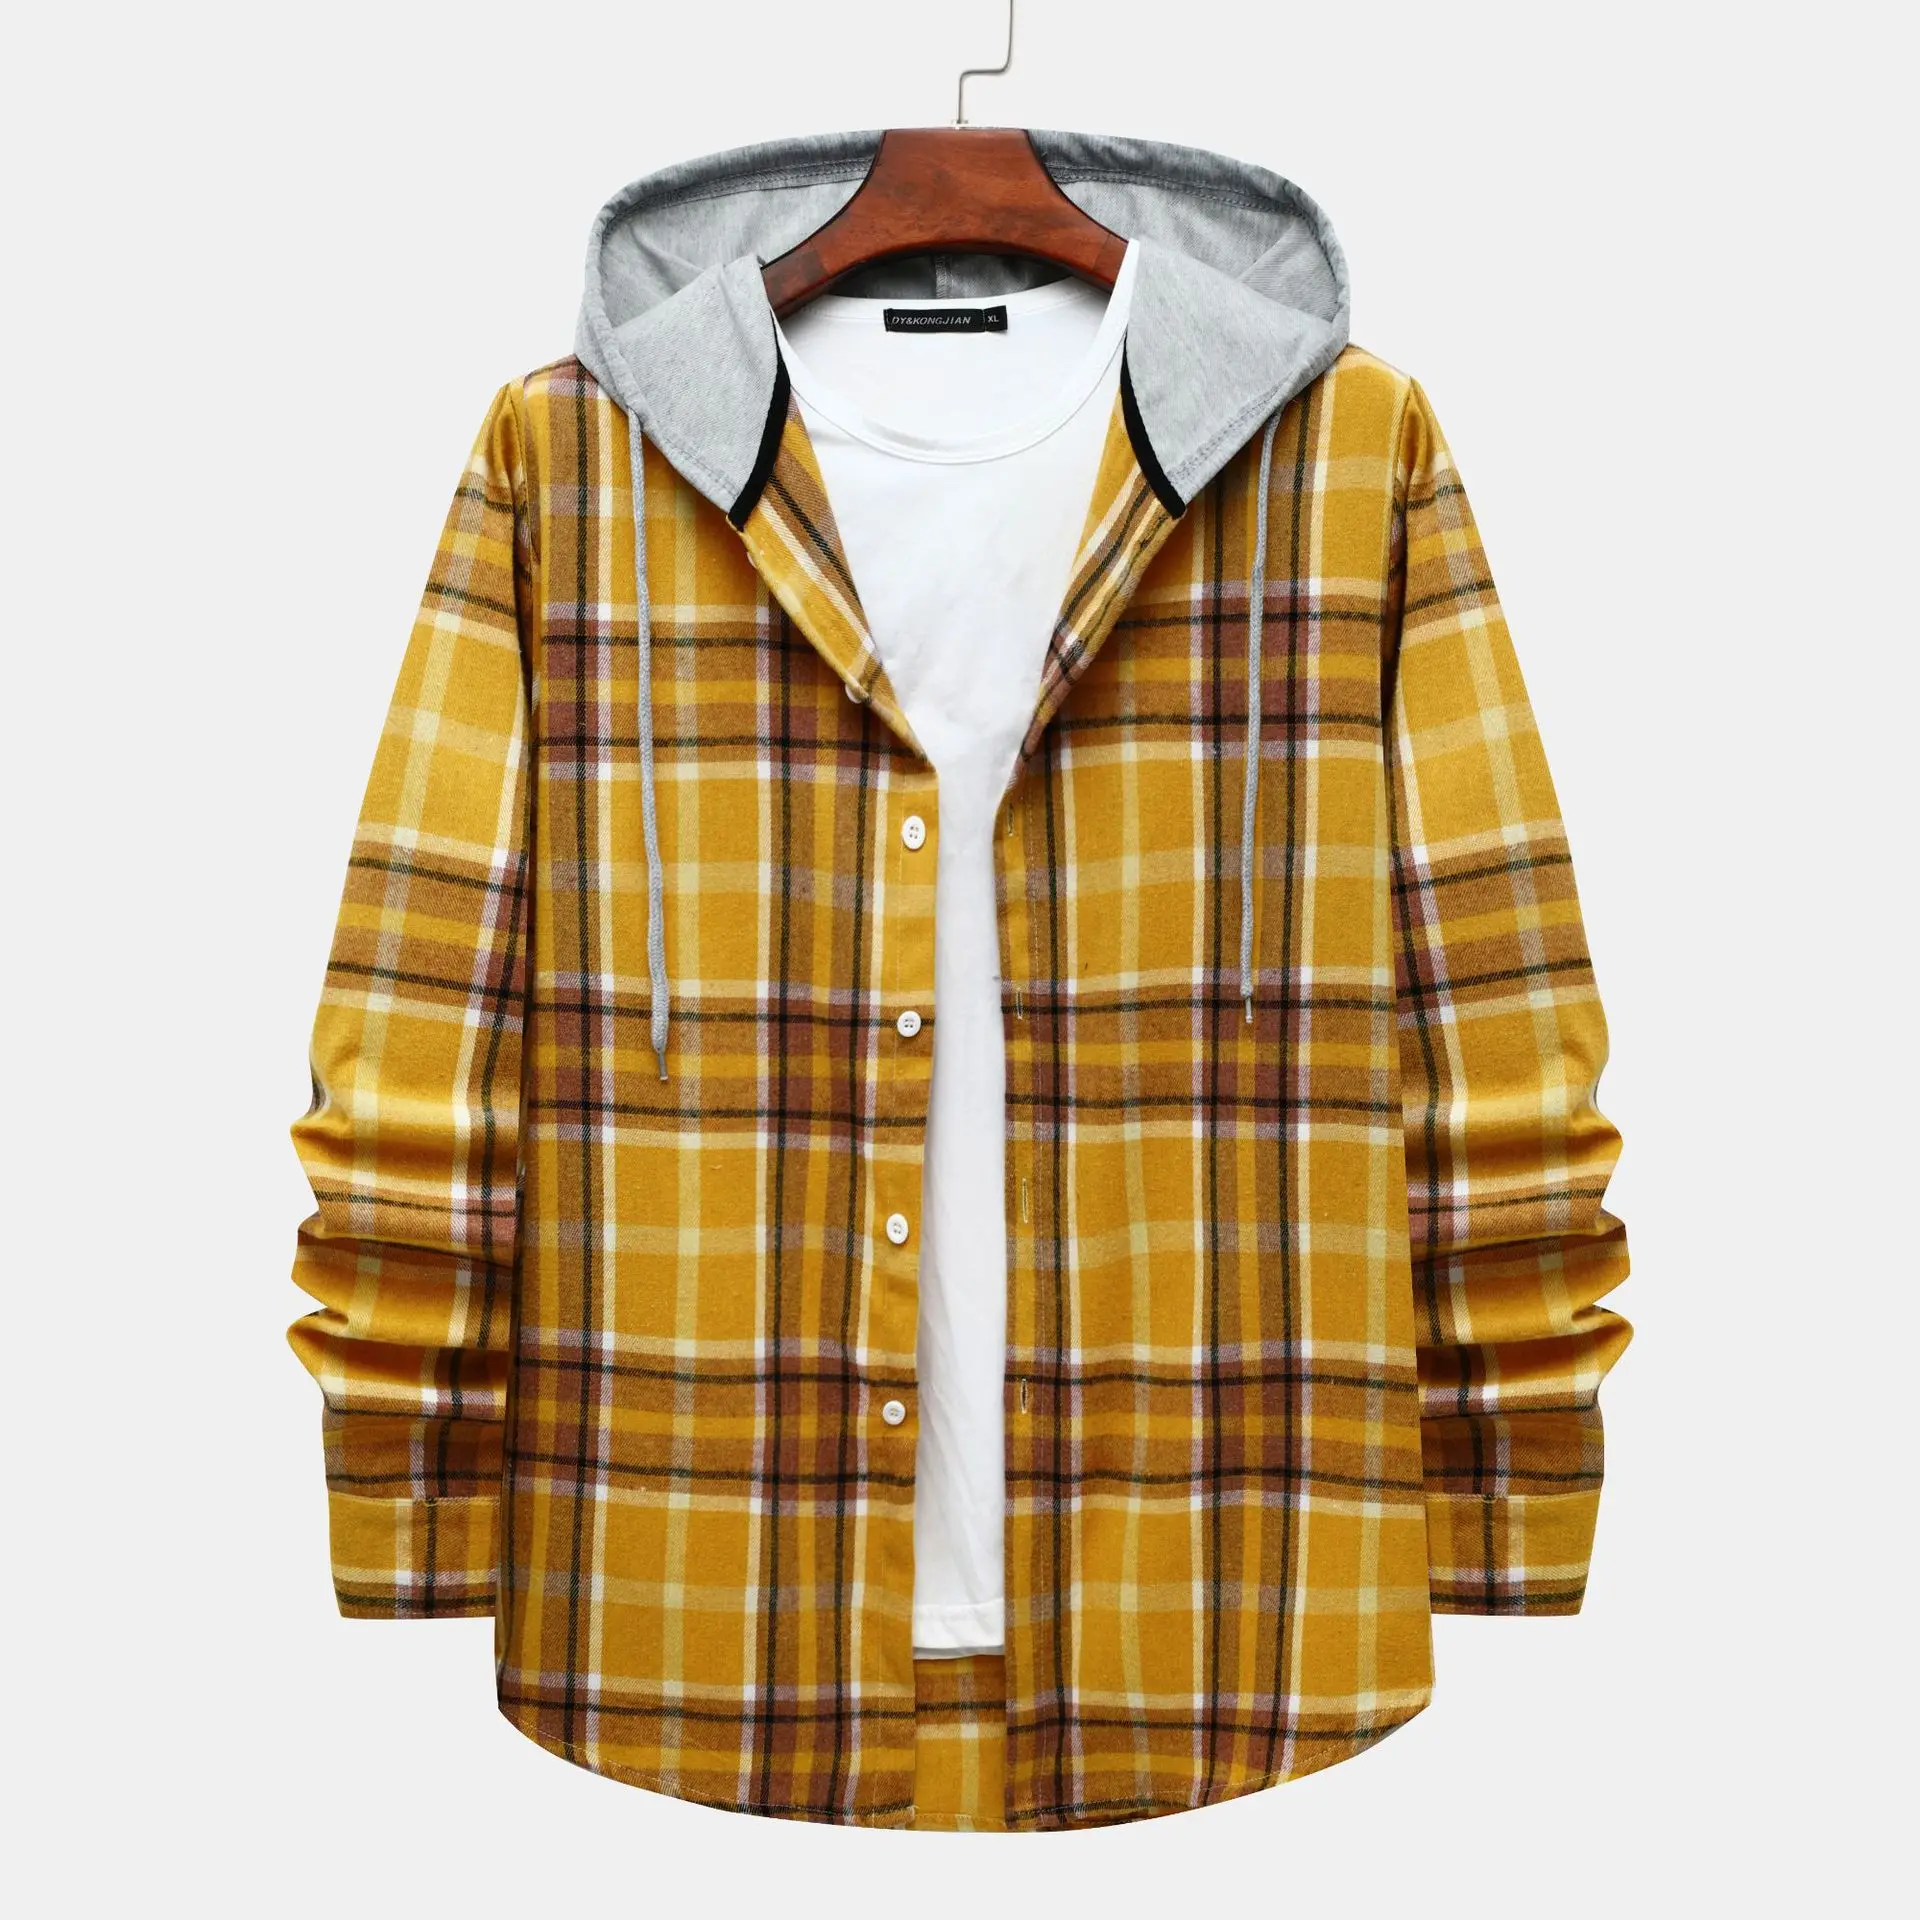 

LUCLESAM Men's Plaid Stitching Hooded Shirt Flannel Lattice Tops Large Size Spring New Fashion Casual checked shirts for men